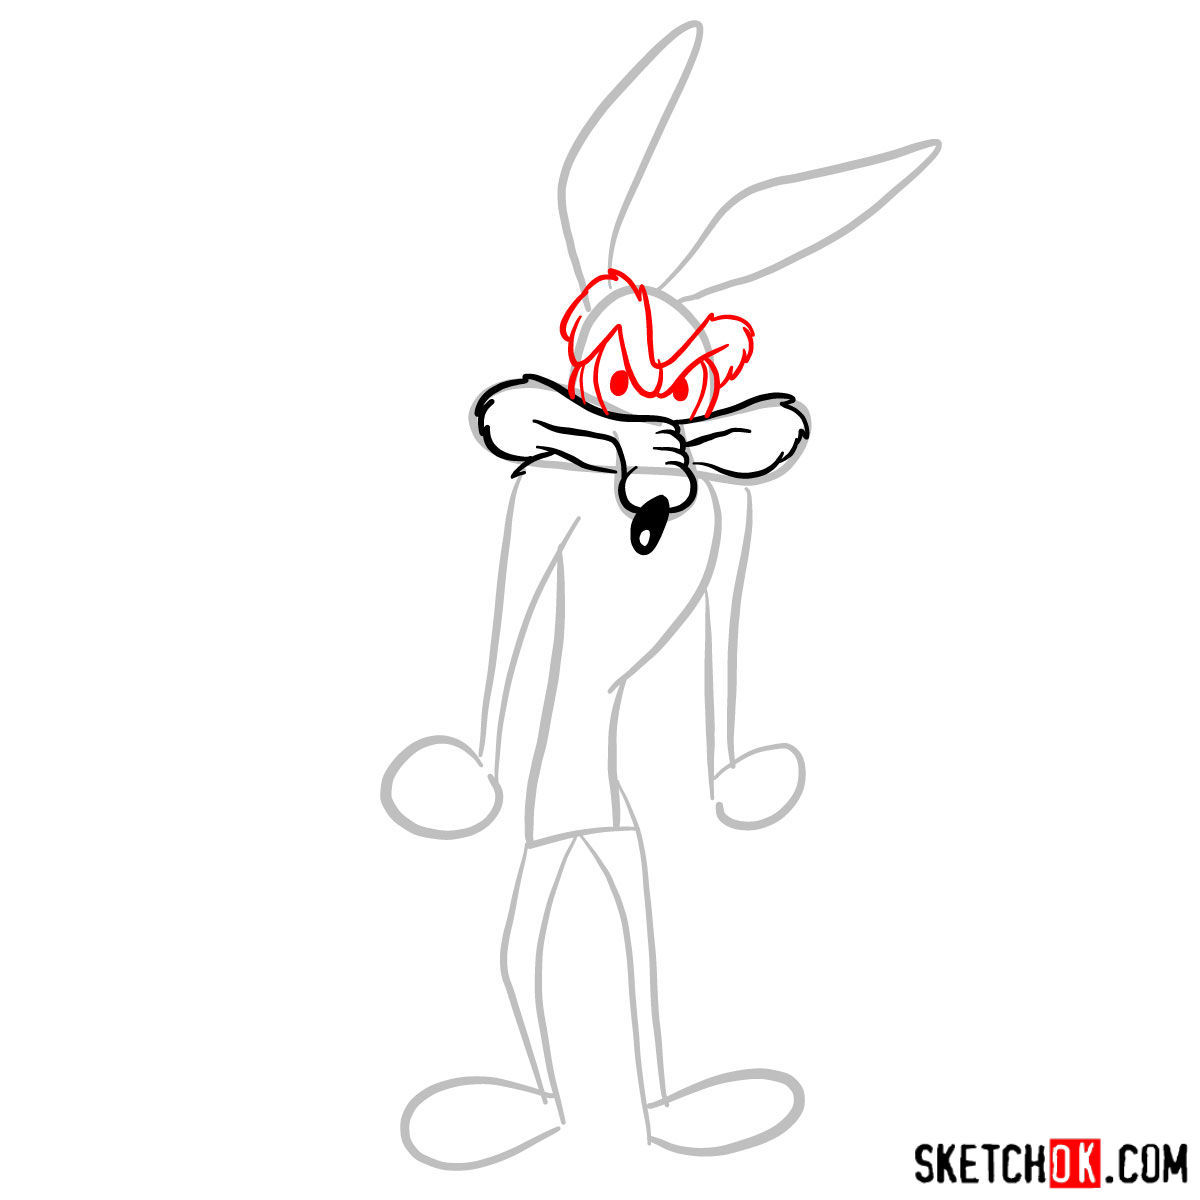 How to draw Wile E. Coyote Sketchok easy drawing guides